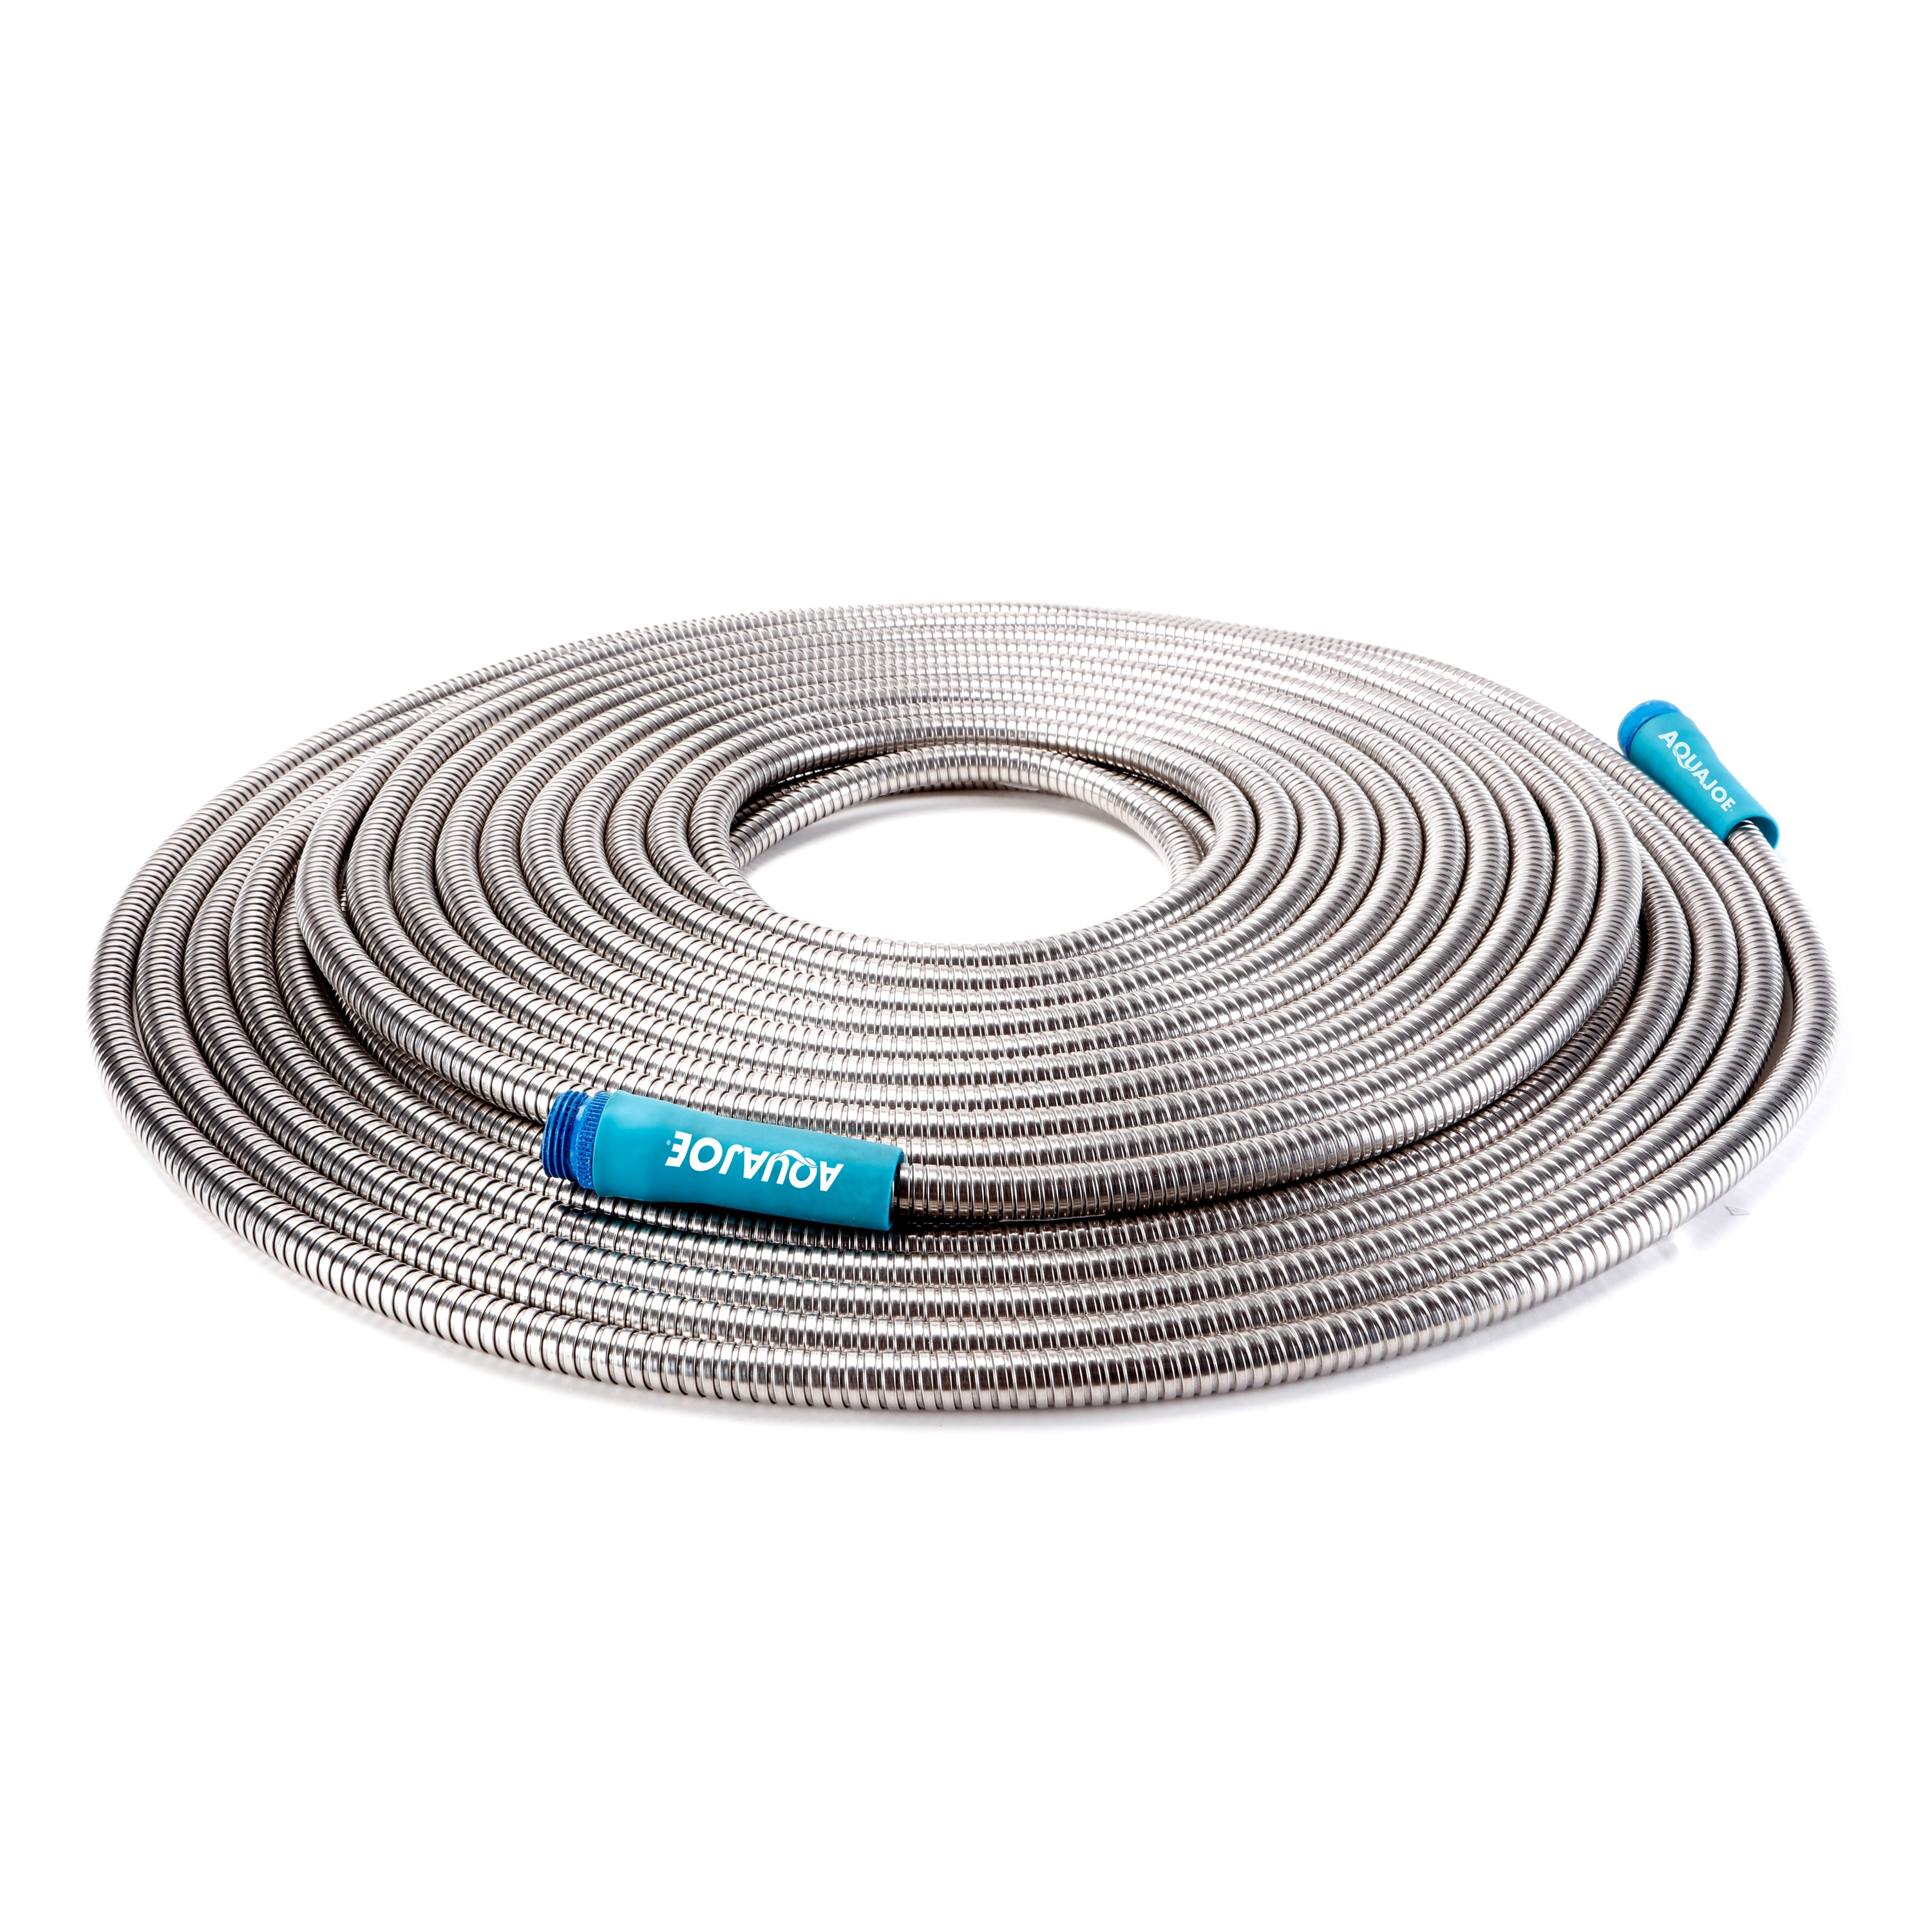 AQUA JOE 1/2-in x 100-ft Heavy-Duty Kink Free Stainless Steel Hose in the Garden  Hoses department at